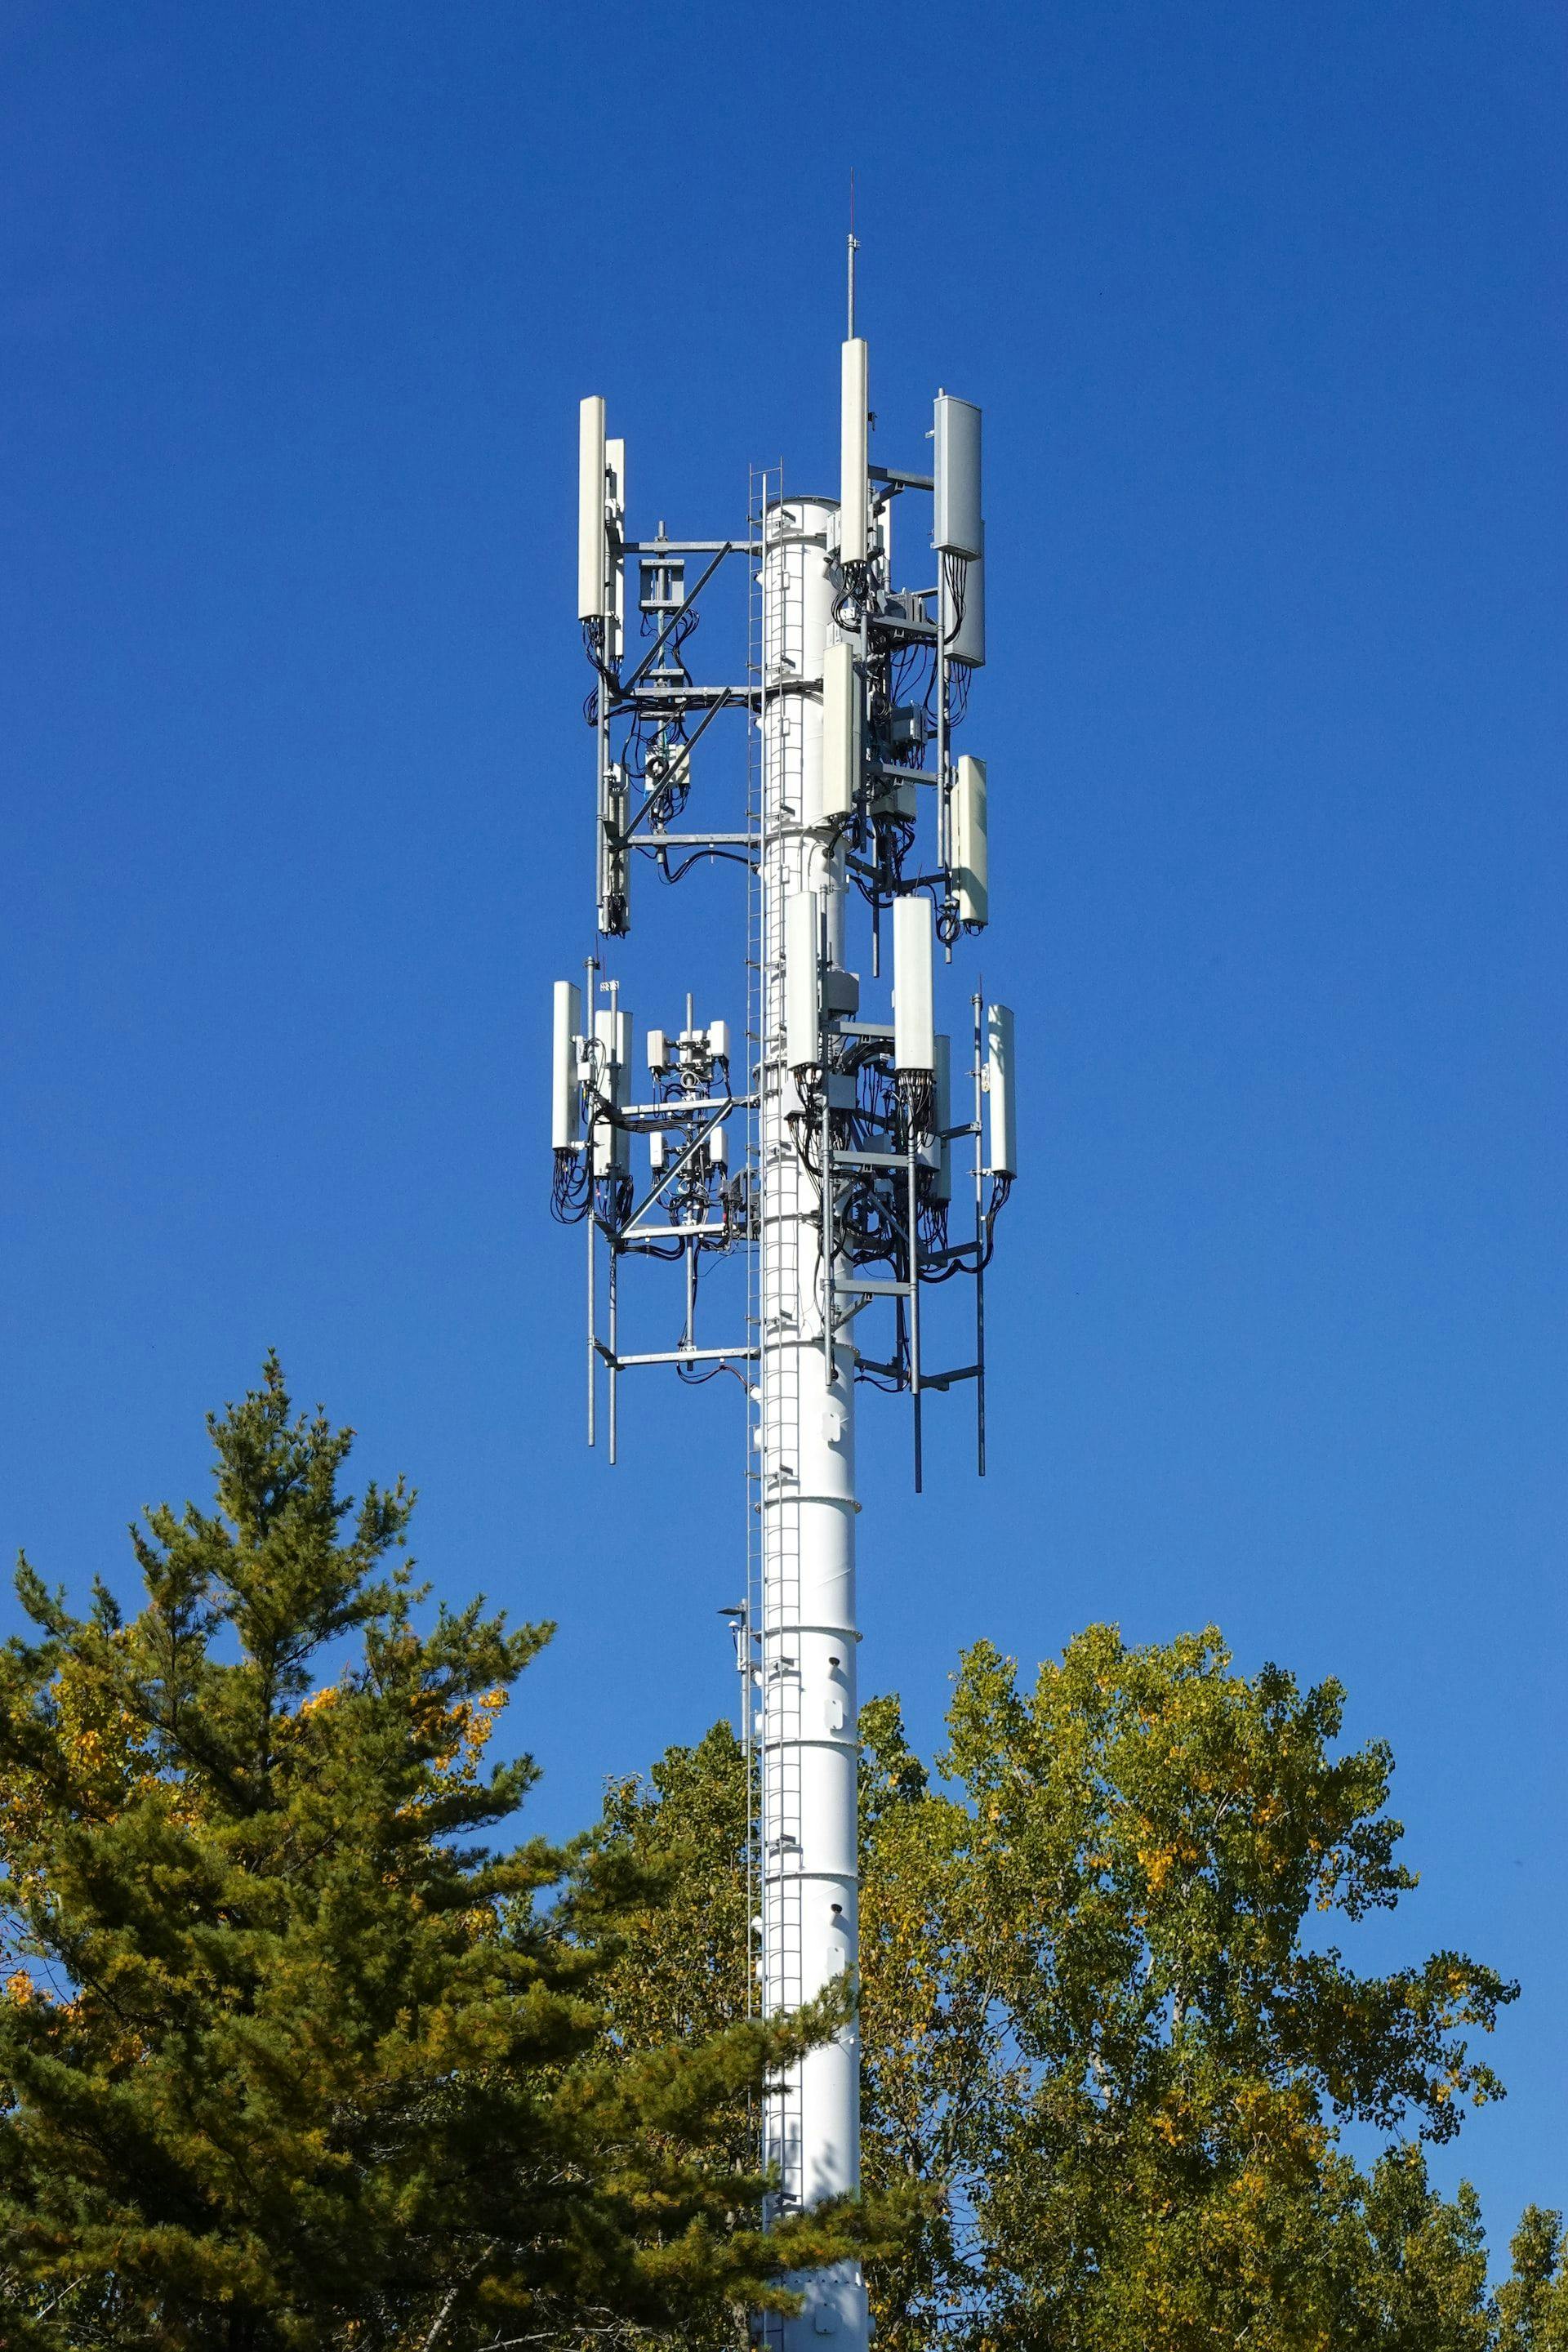 400 5G towers to appear in Luxembourg — high-speed communication will be rolled out by 2025